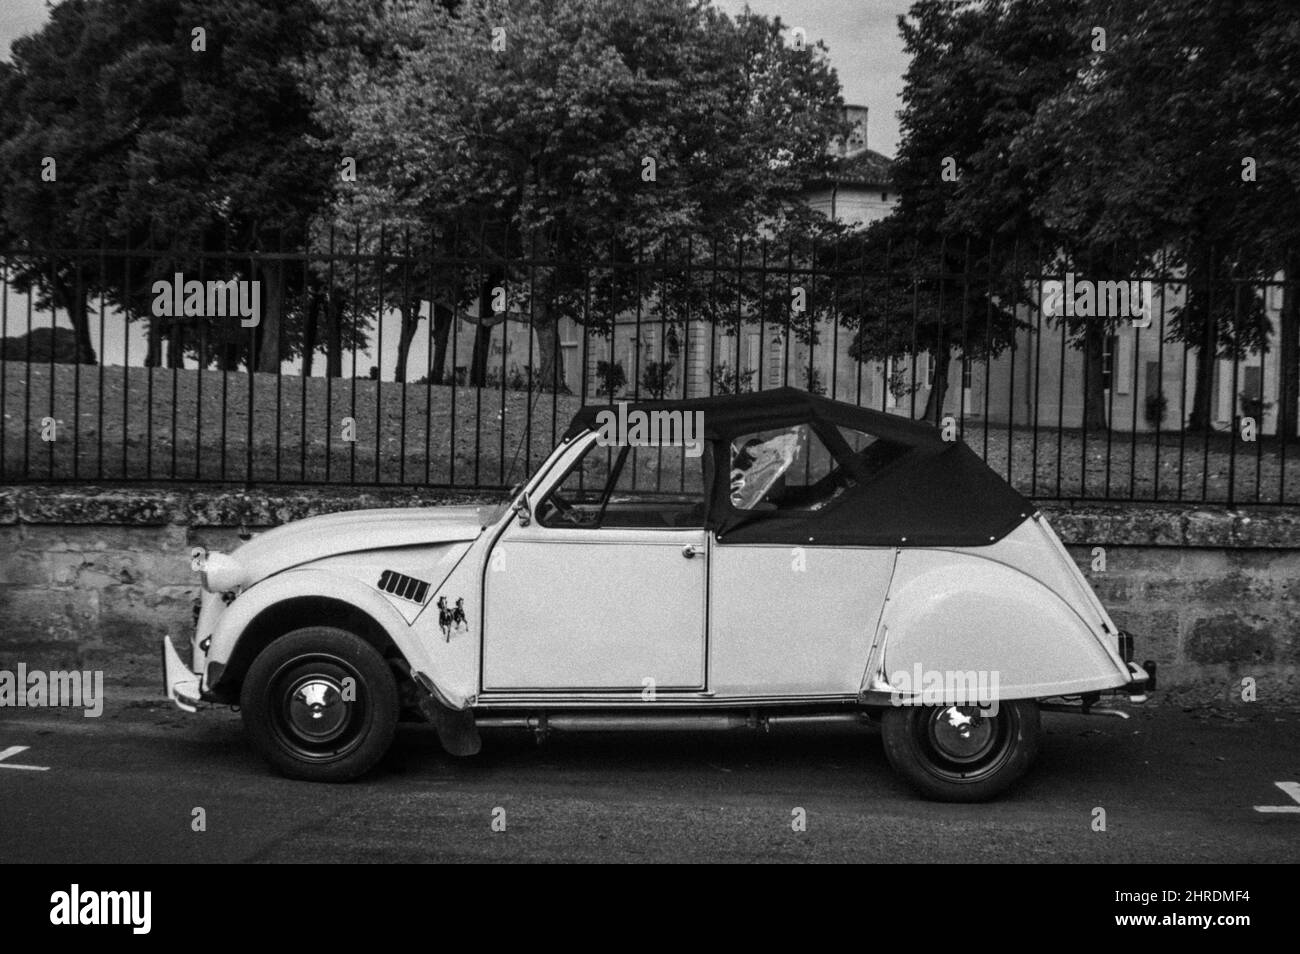 Grayscale of a classic Citroen 2CV car on the street Stock Photo